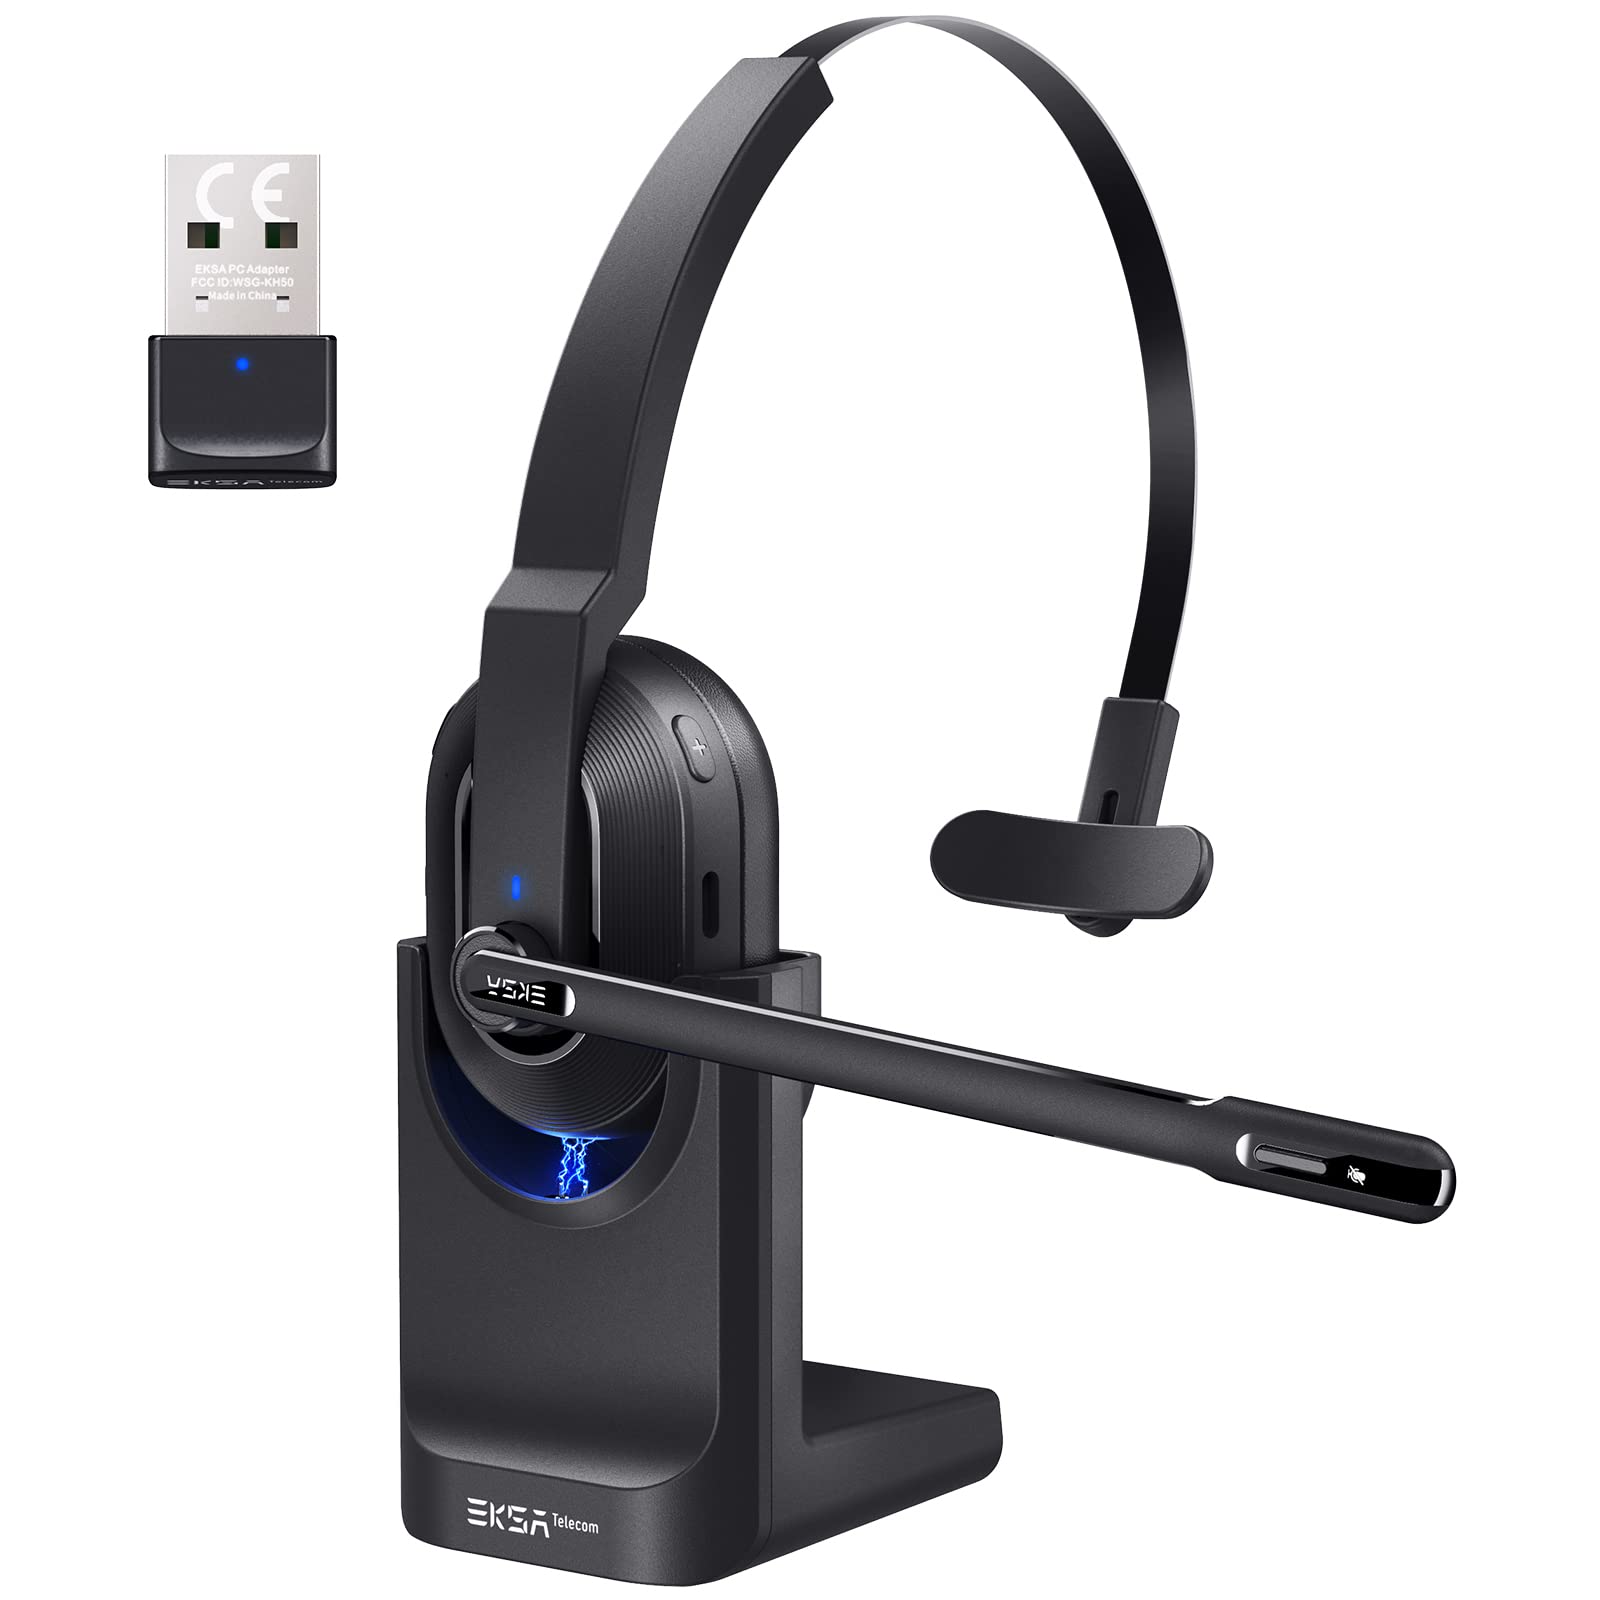 Connect the Bluetooth headset to a different computer or device to see if the mic works properly there.
 If the mic works on another device, the issue may be with the original computer or settings.